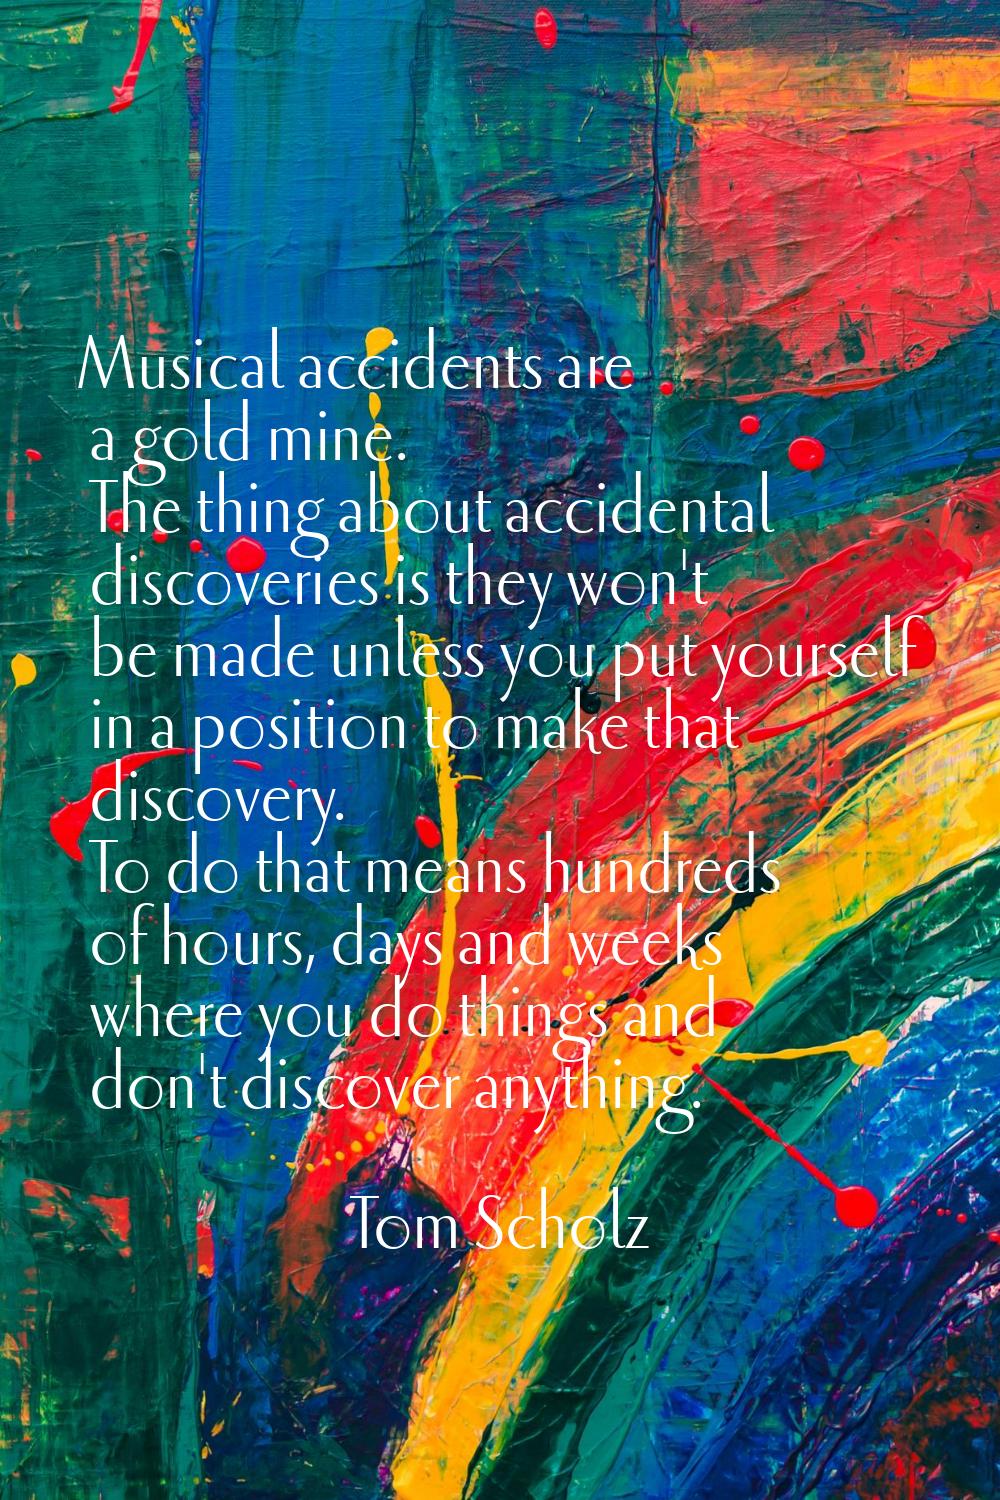 Musical accidents are a gold mine. The thing about accidental discoveries is they won't be made unl